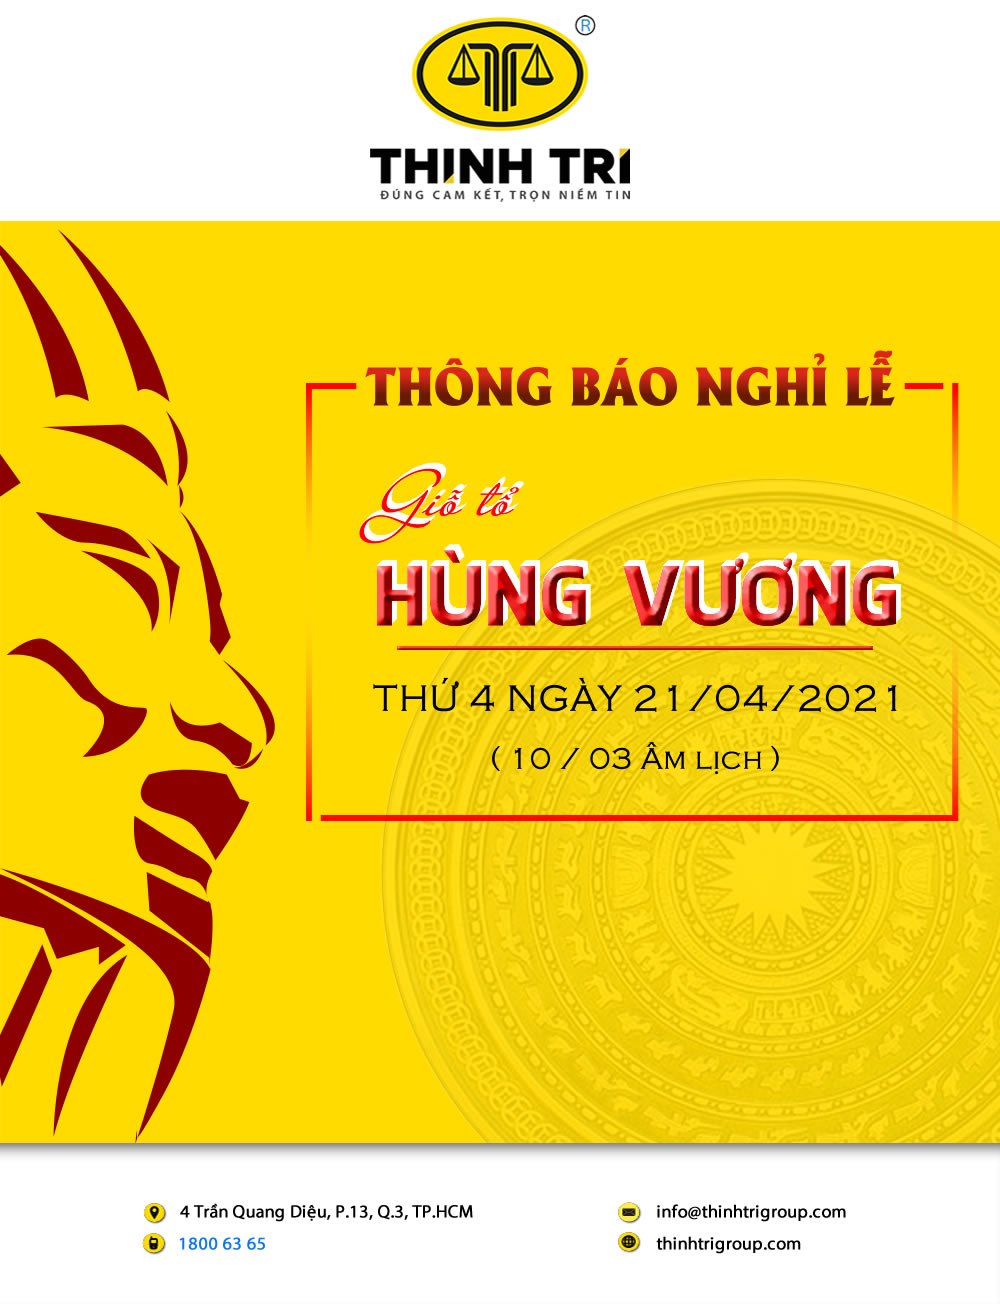 THI THI THI TRI LAW GROUP ANNOUNCES HUNG KINGS COMMEMORATION DAY (March 10, Lunar Calendar - Wednesday, April 21, 2021) )